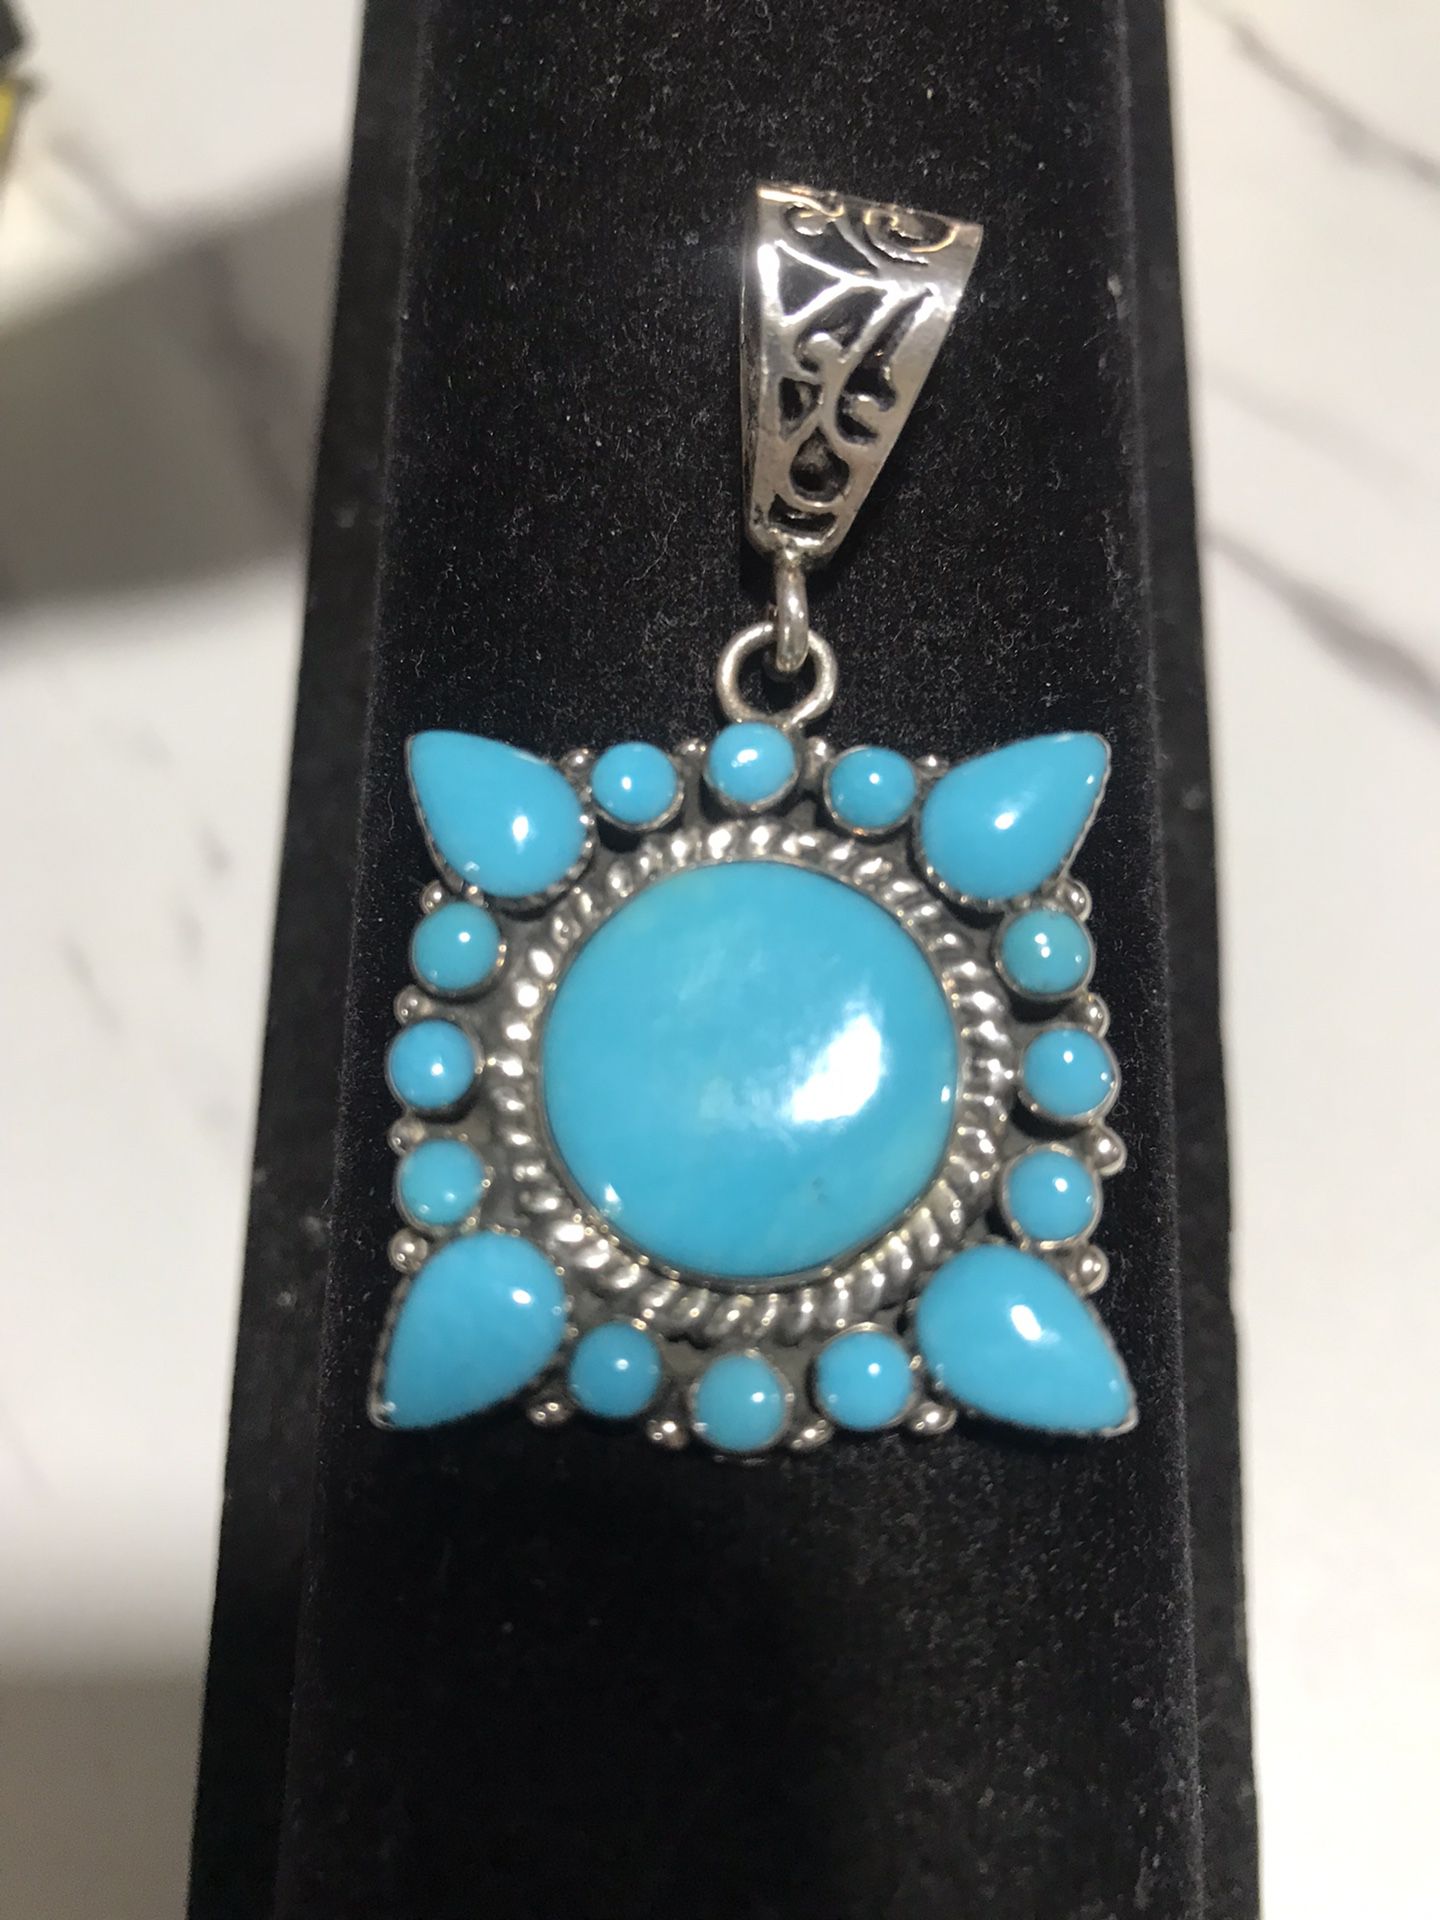 Vintage Sterling Silver and Sleeping Beauty Turquoise Pendant 